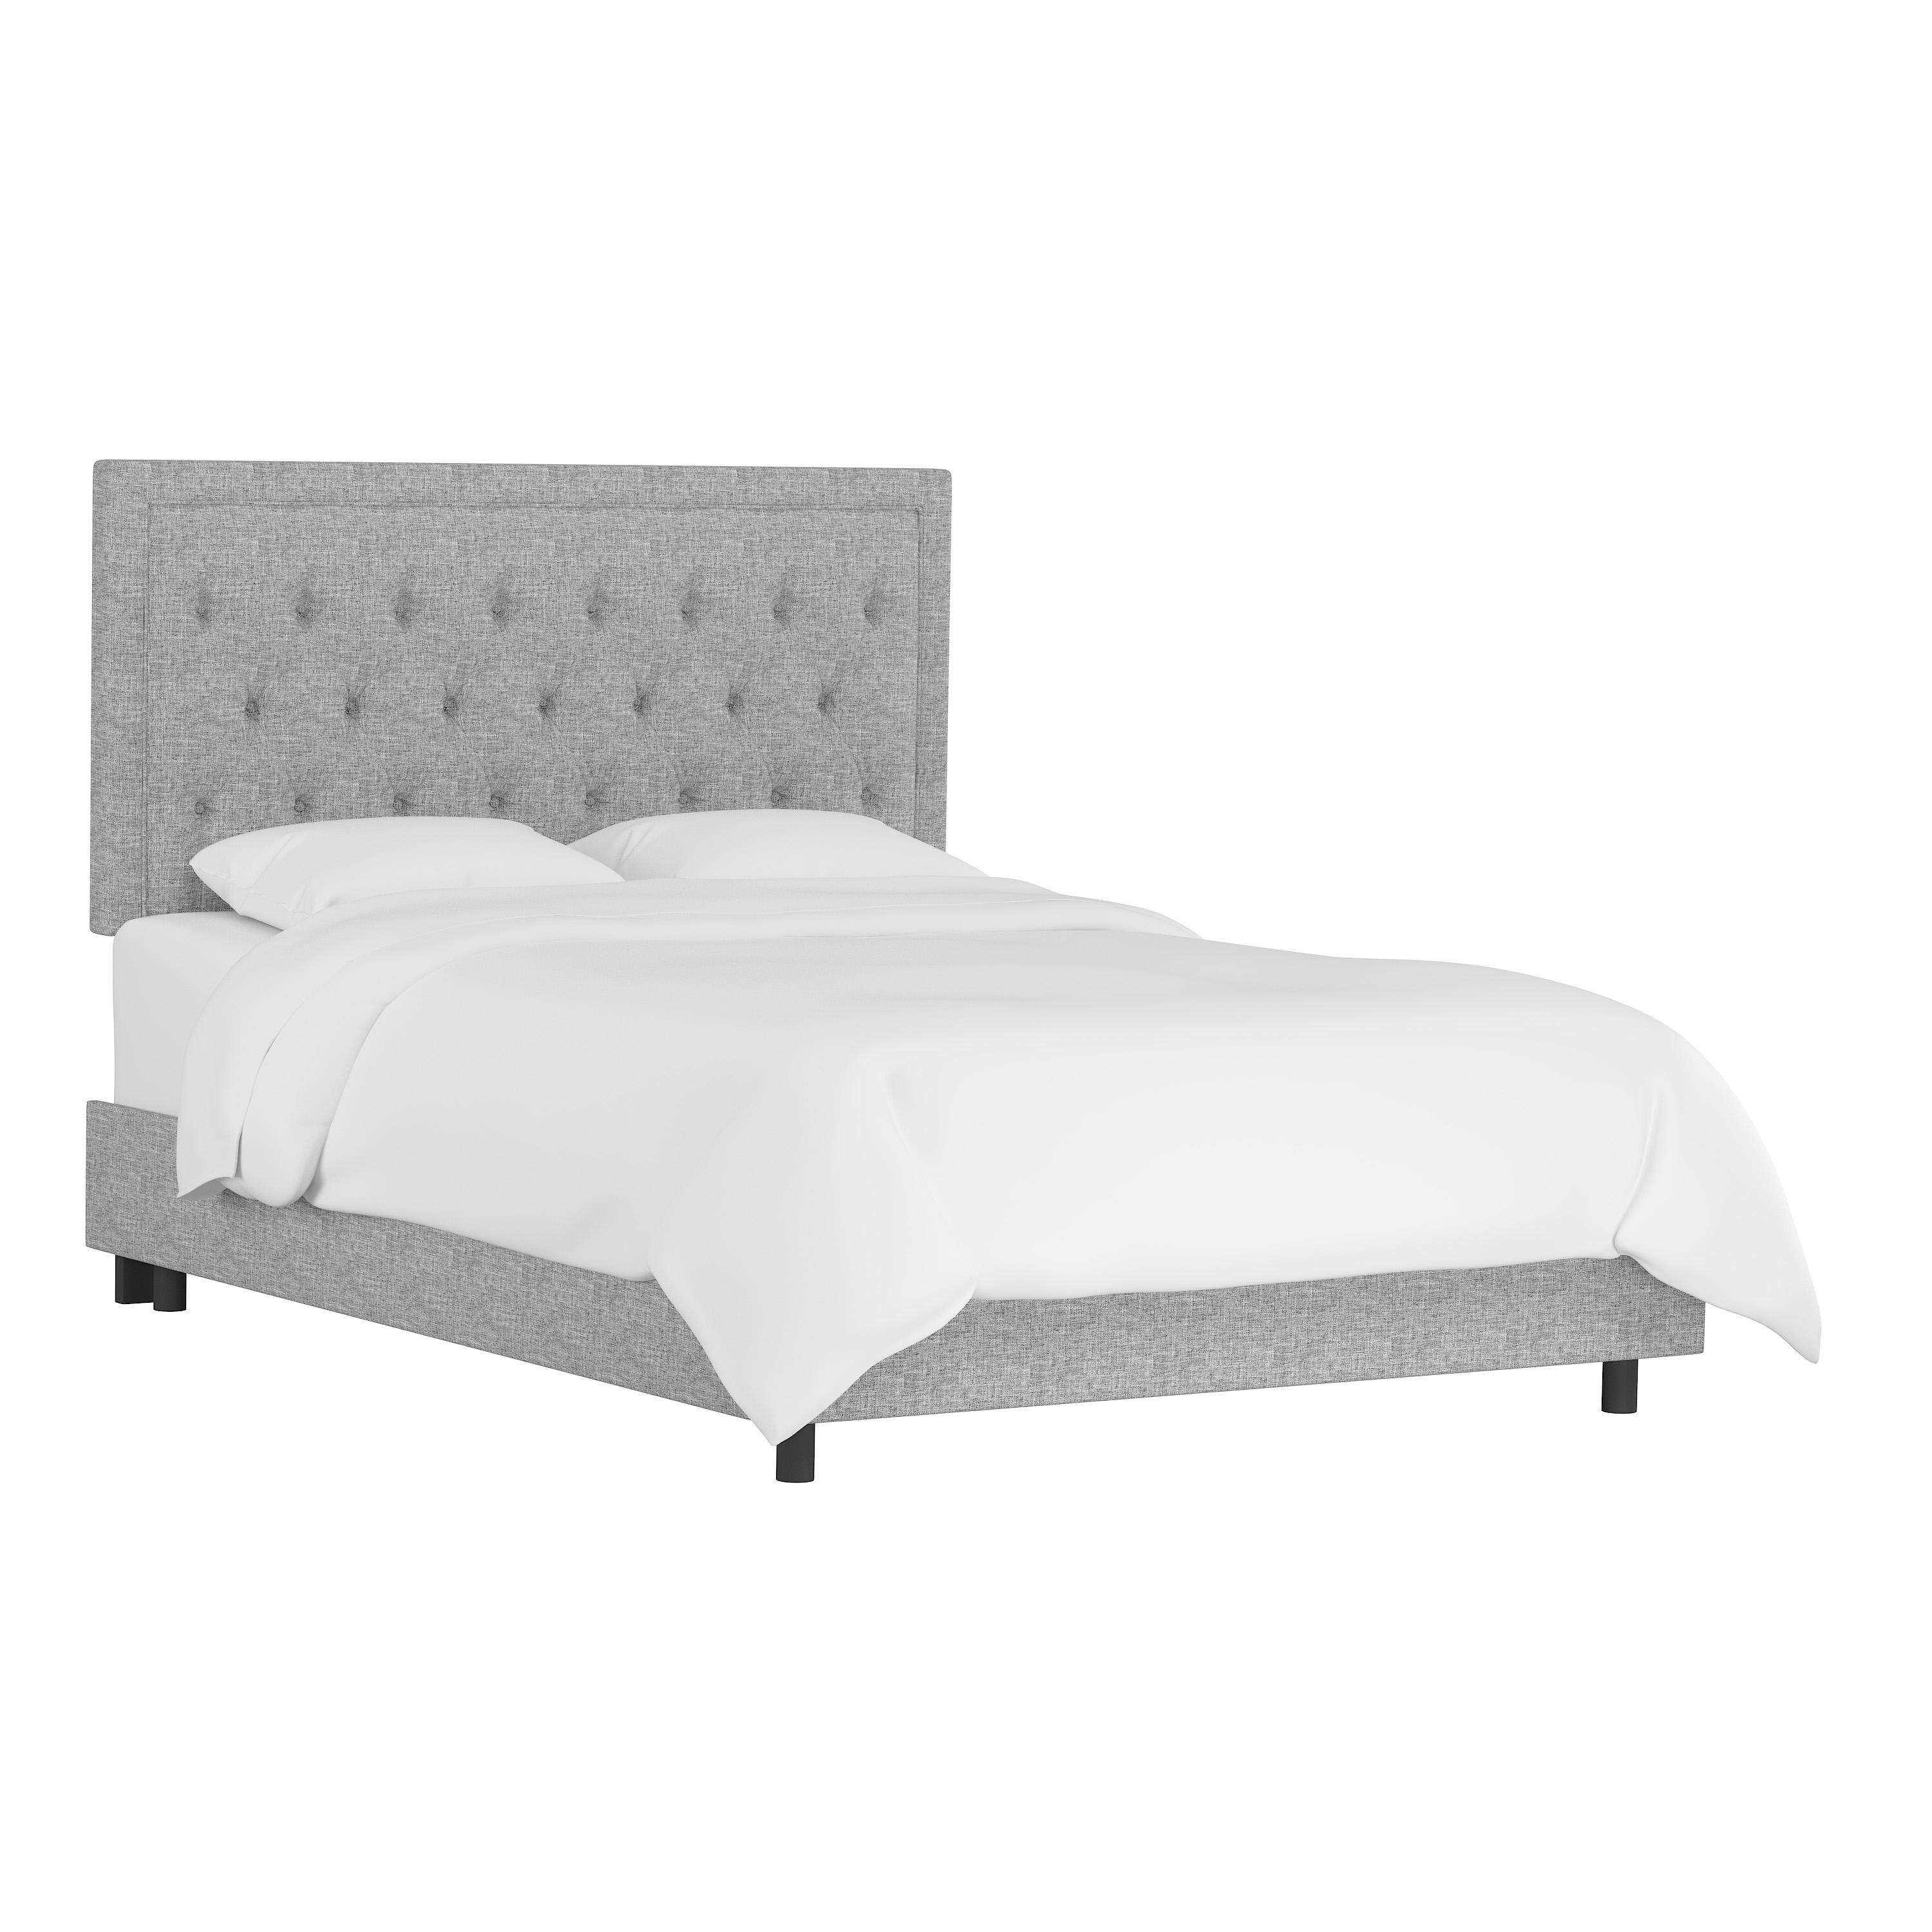 Lafayette Bed, King, Pumice - Image 0